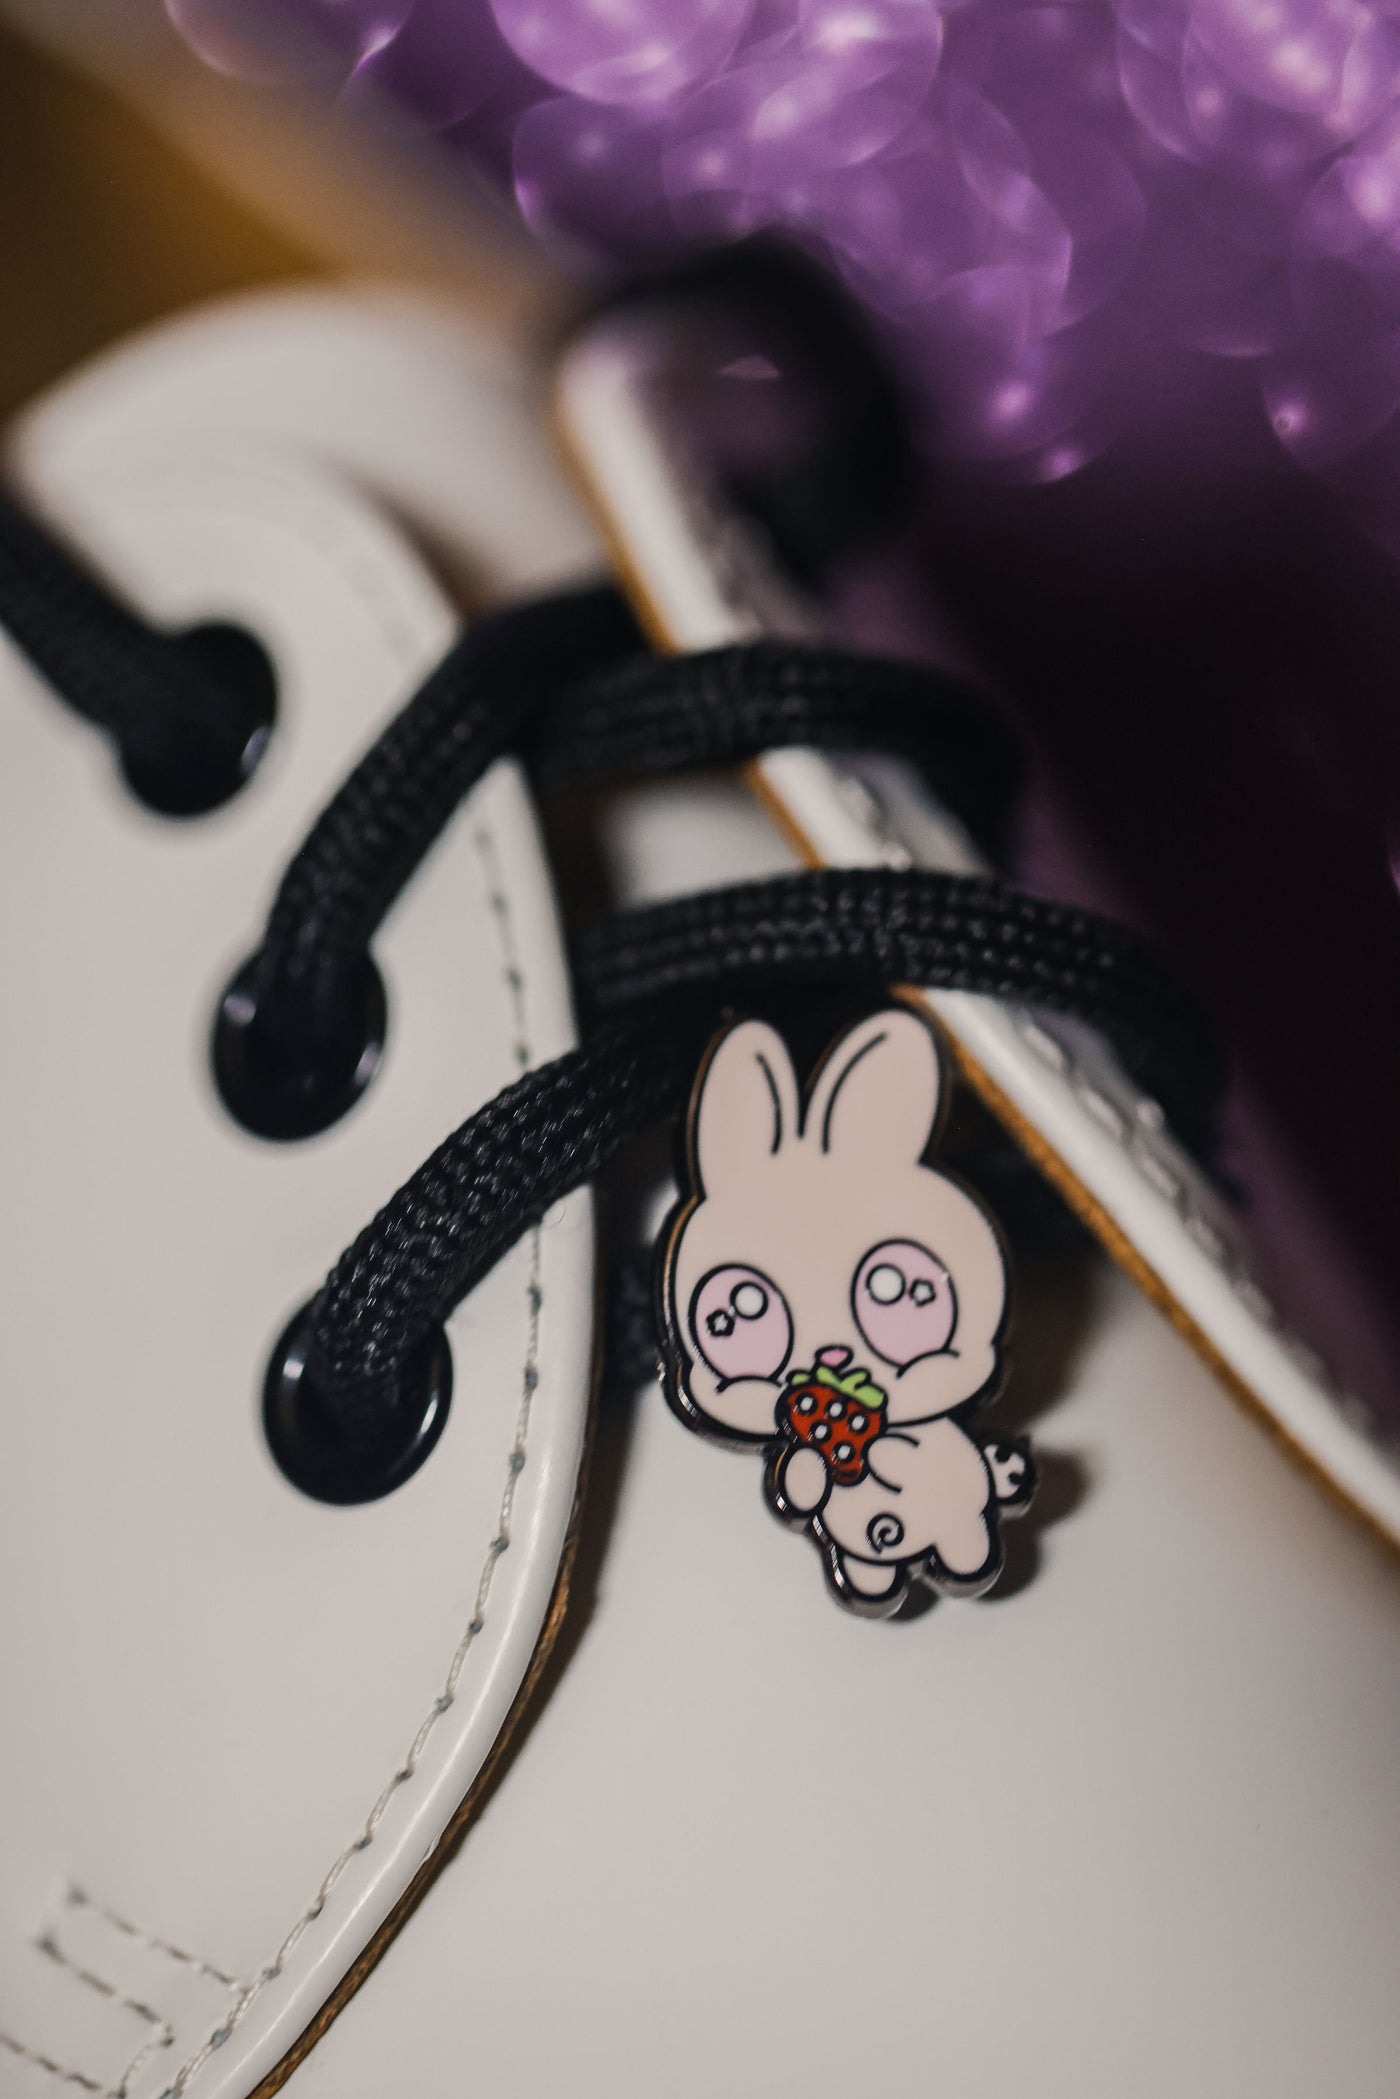 Strawberry Bunny Lace Charm - Spooky and Kawaii Bunnies Collection